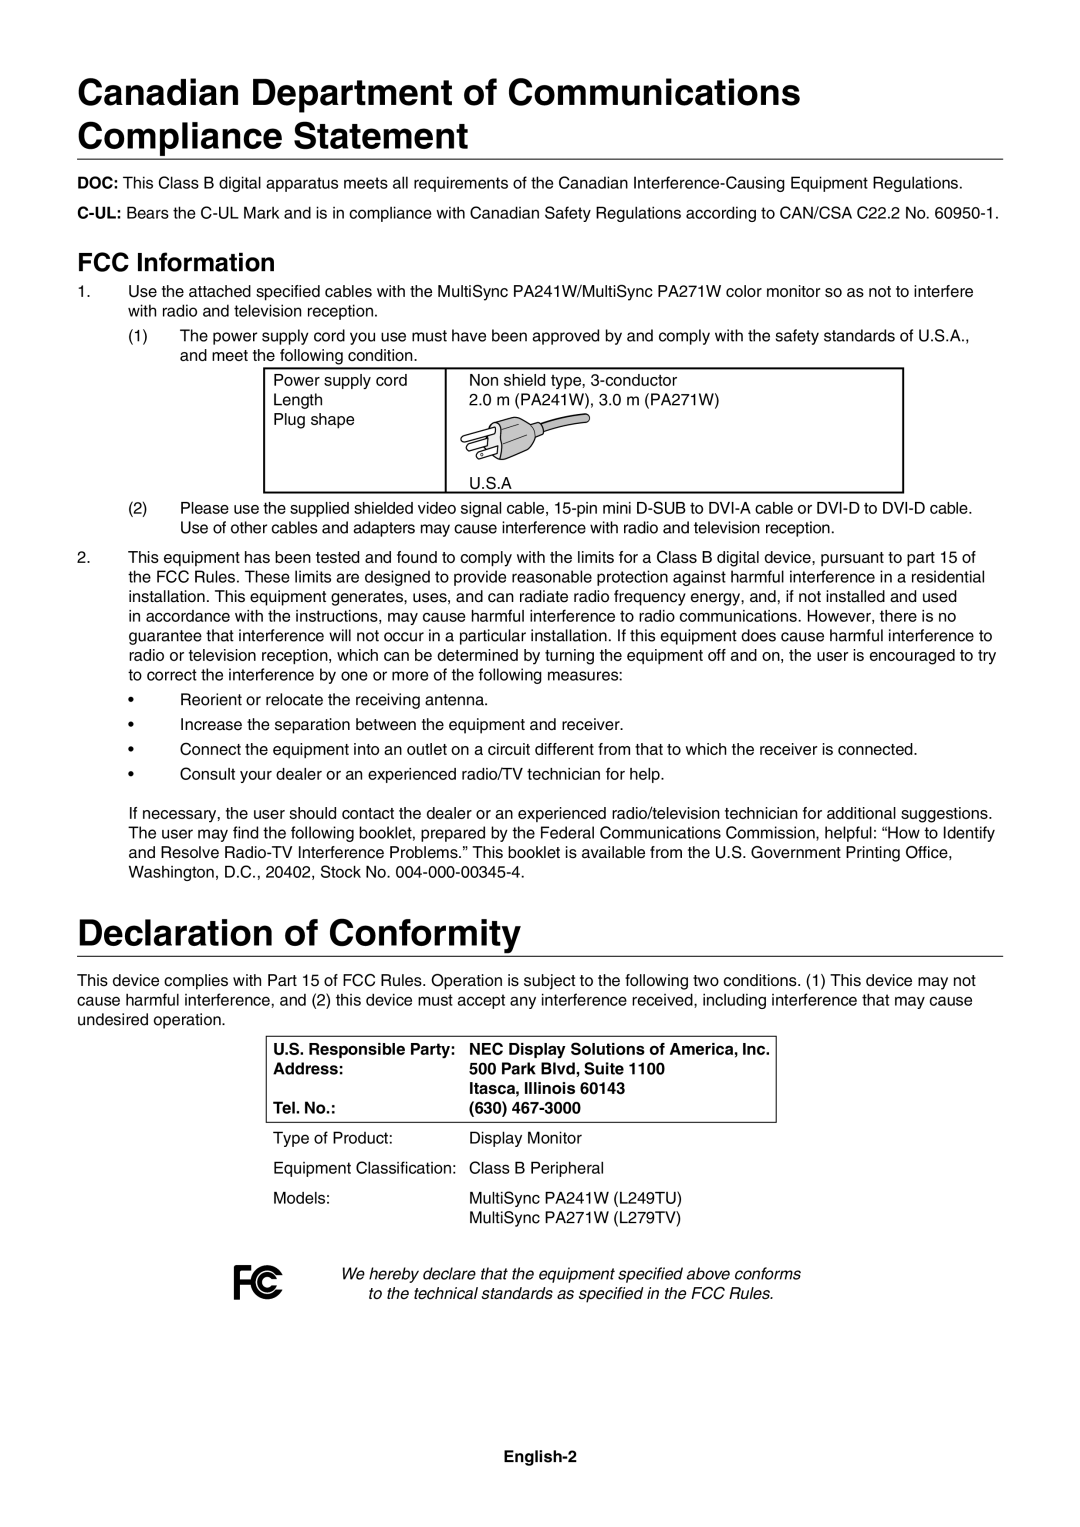 NEC PA271W Canadian Department of Communications Compliance Statement, Declaration of Conformity, FCC Information 